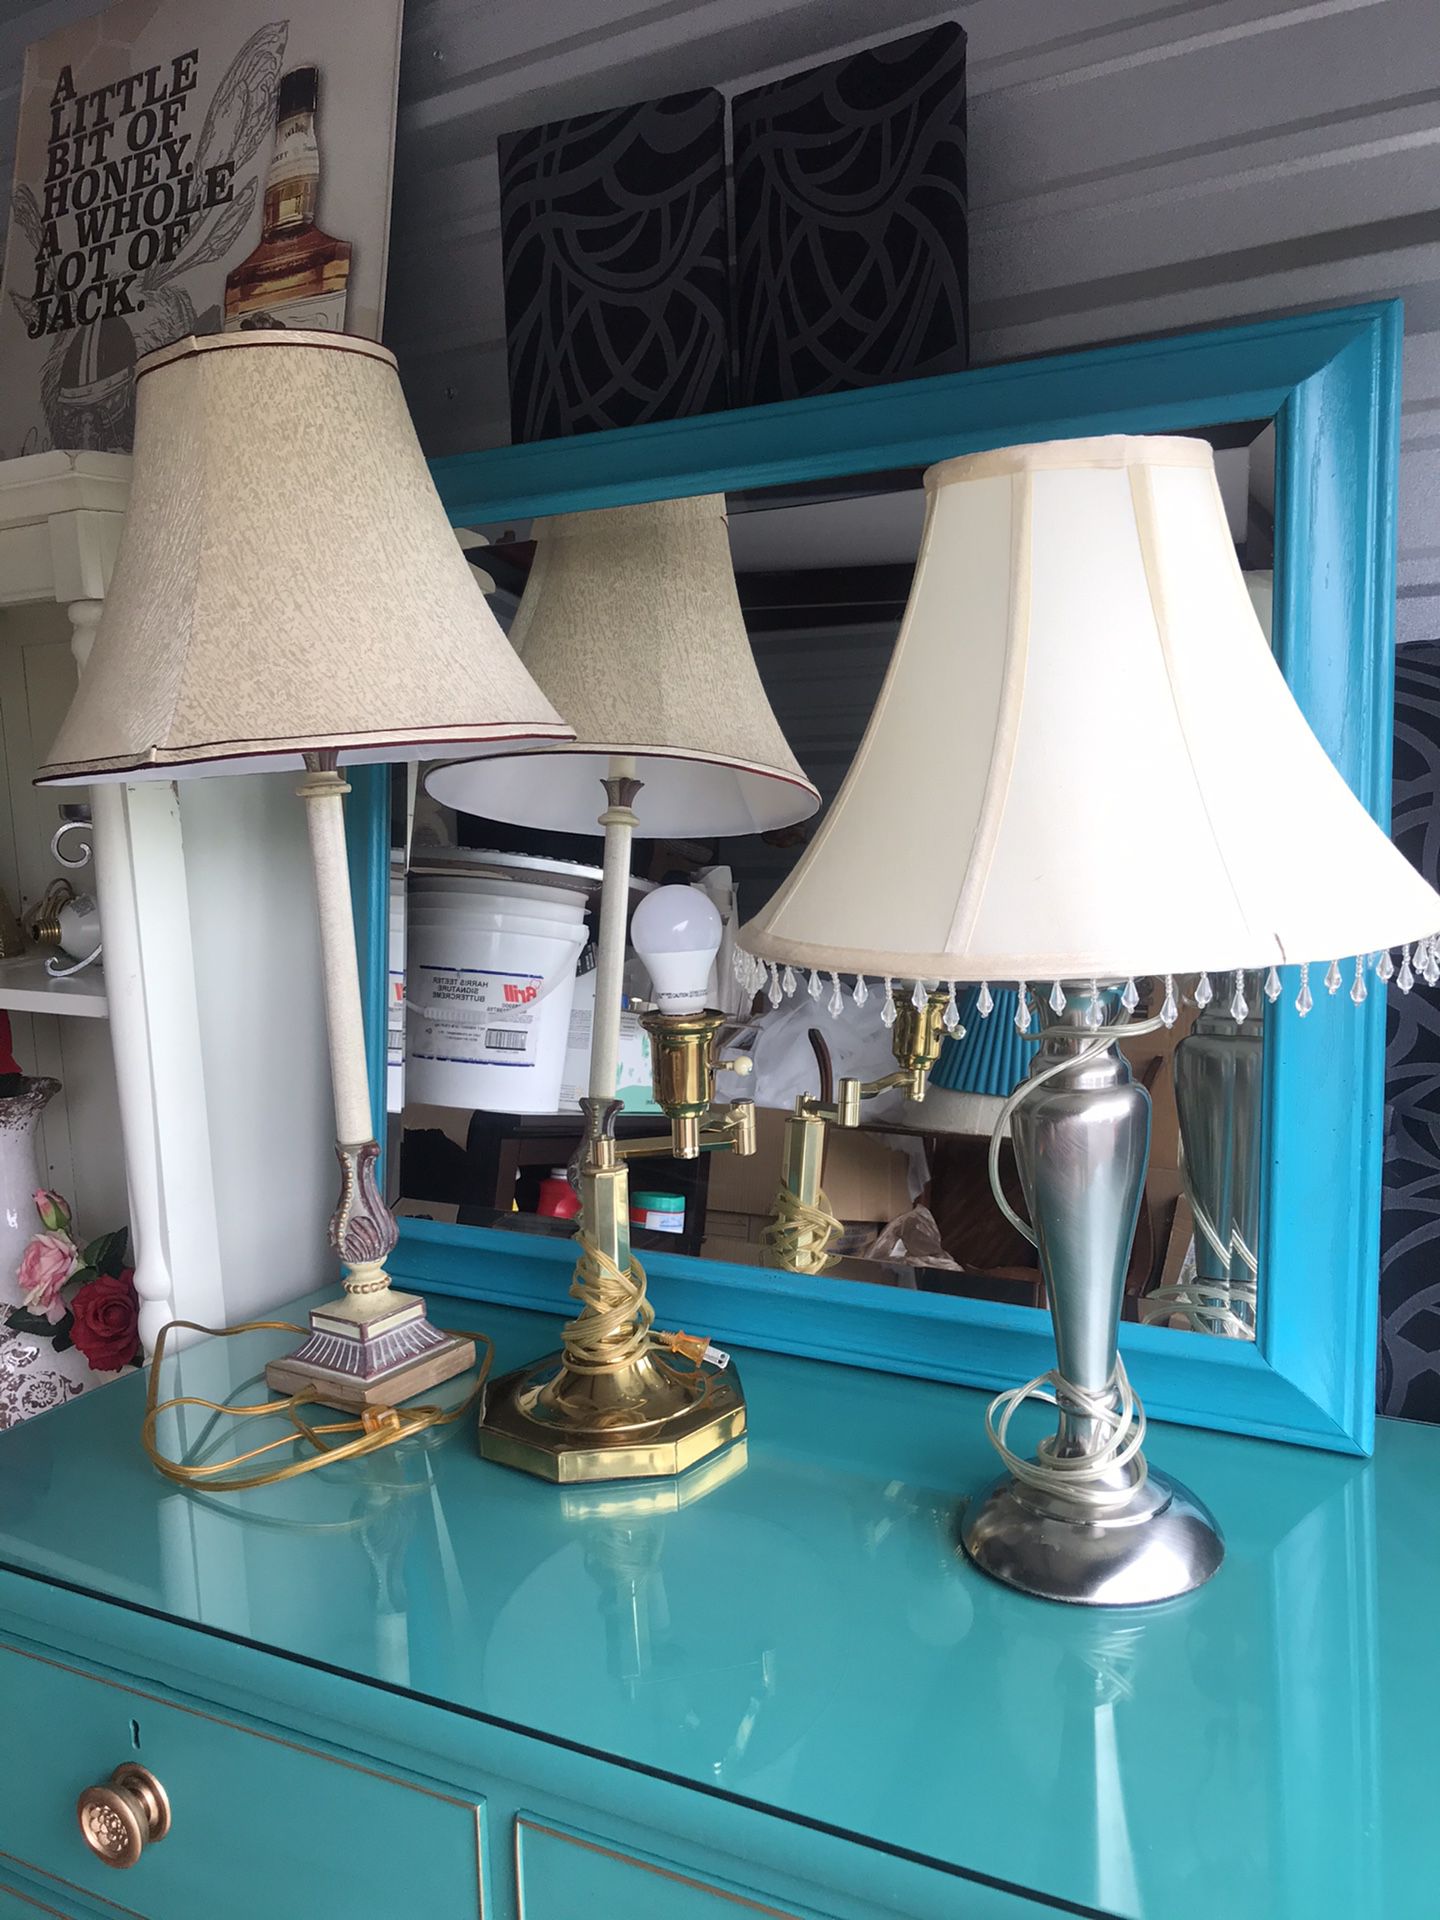 Various lamps and lampshades